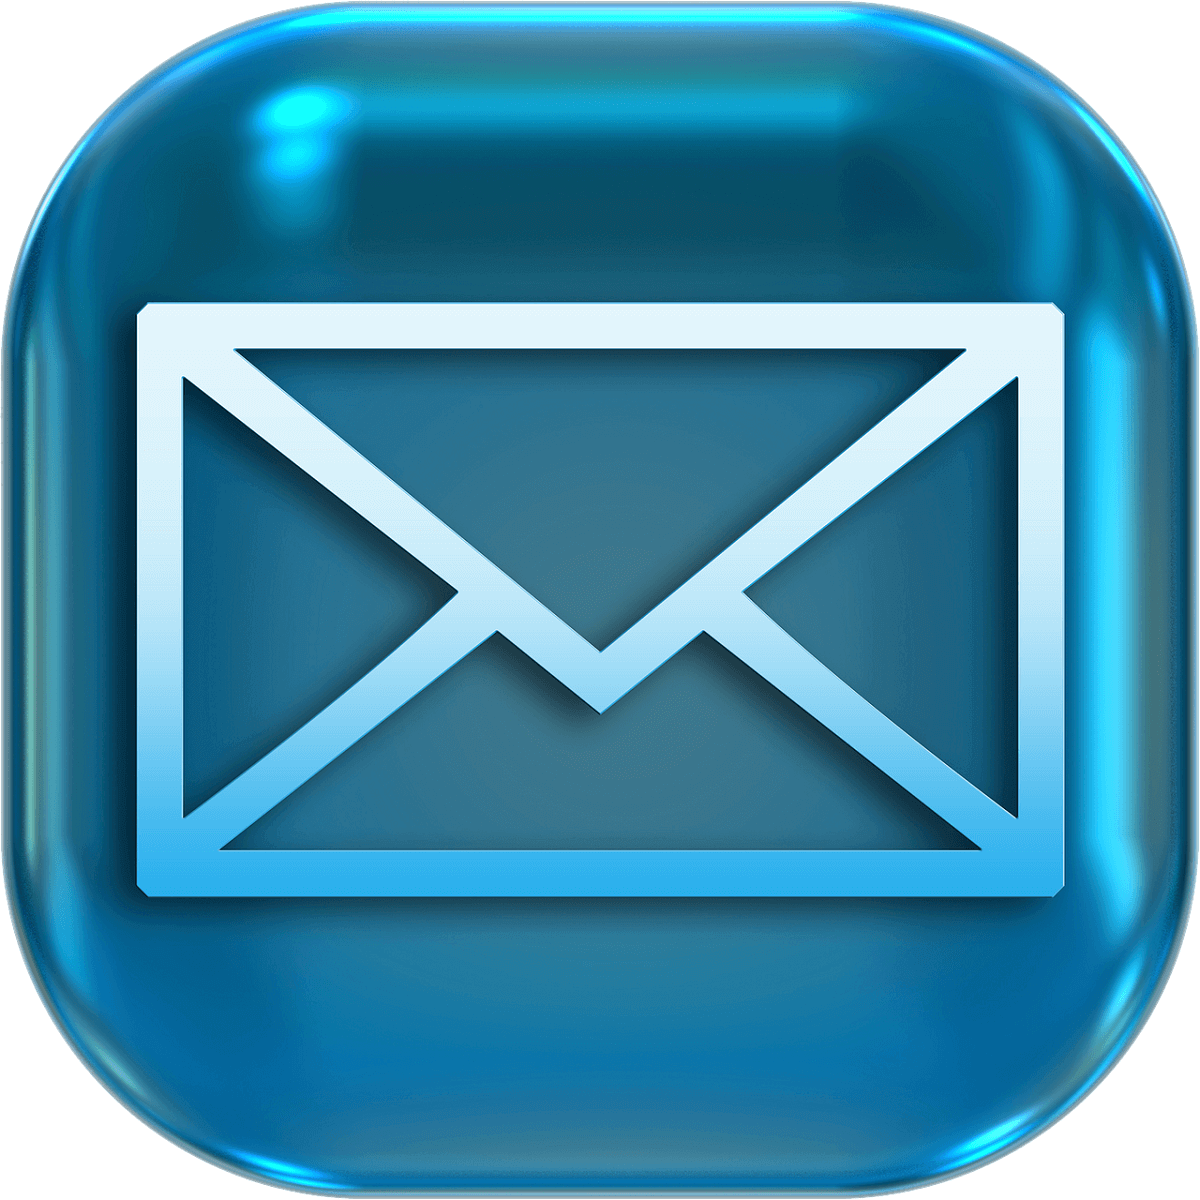 Email clients- for BT internet